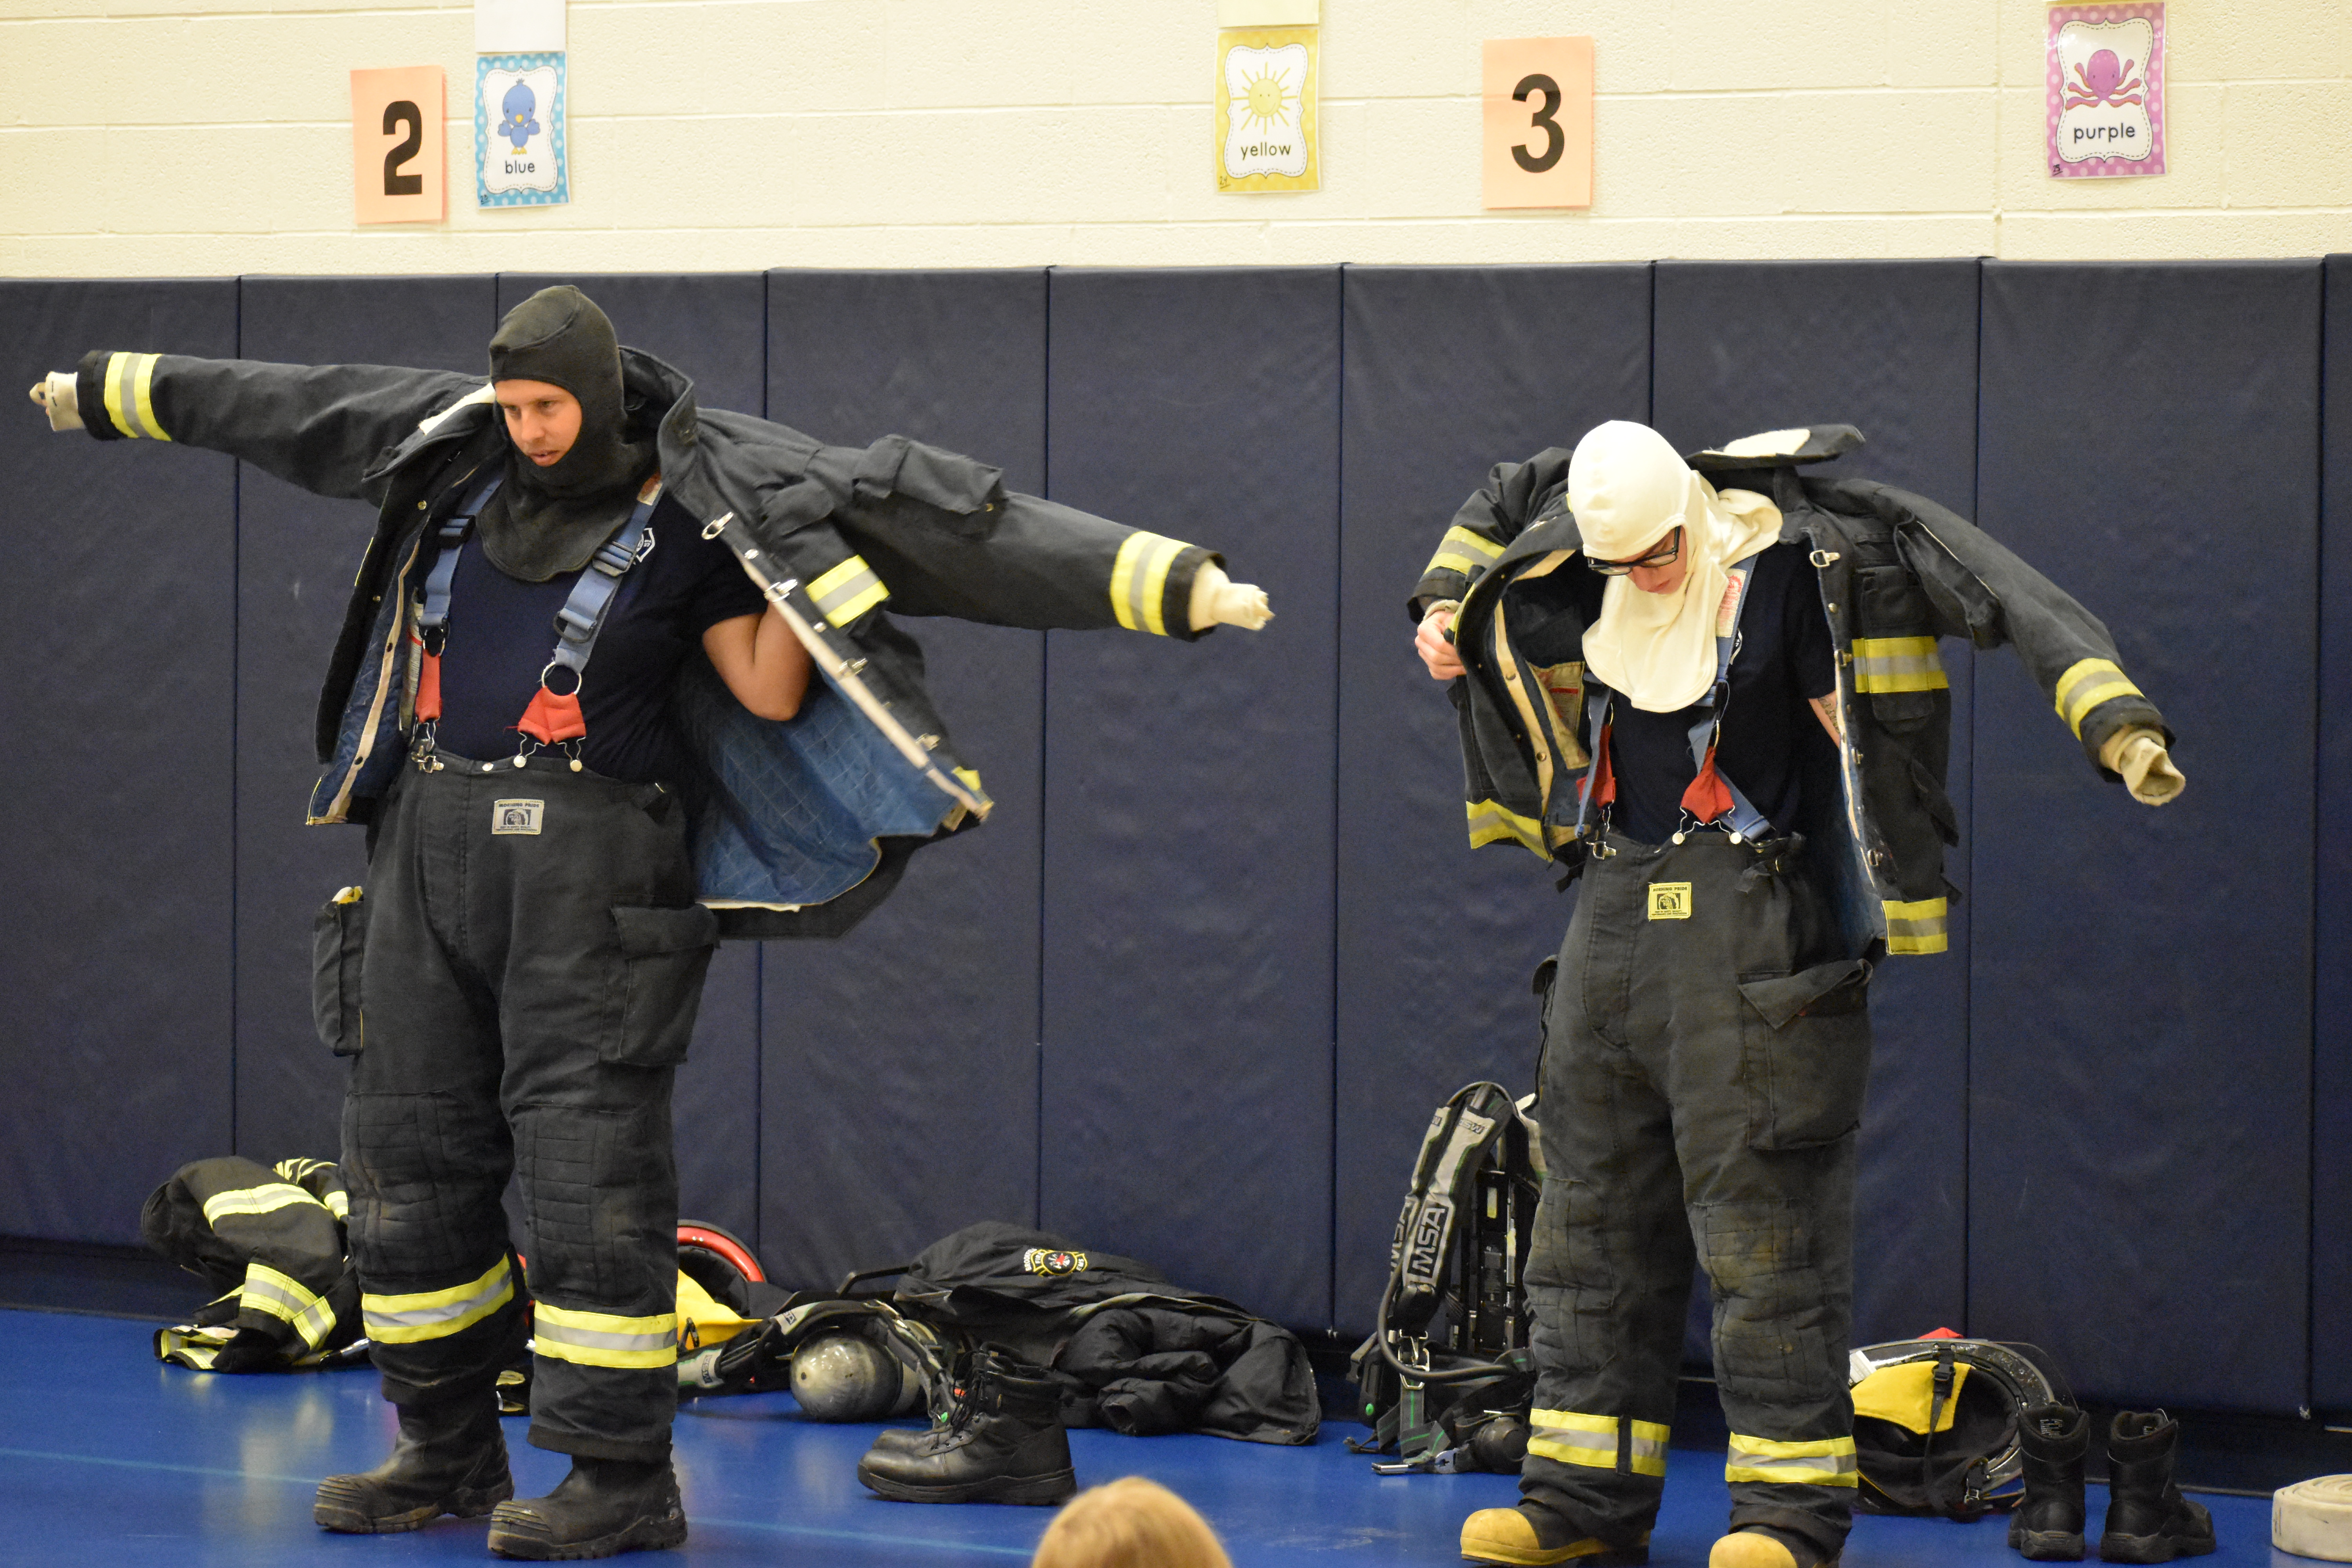 Jeremy Gless, left, and Dale May show how to put on their fire suits.